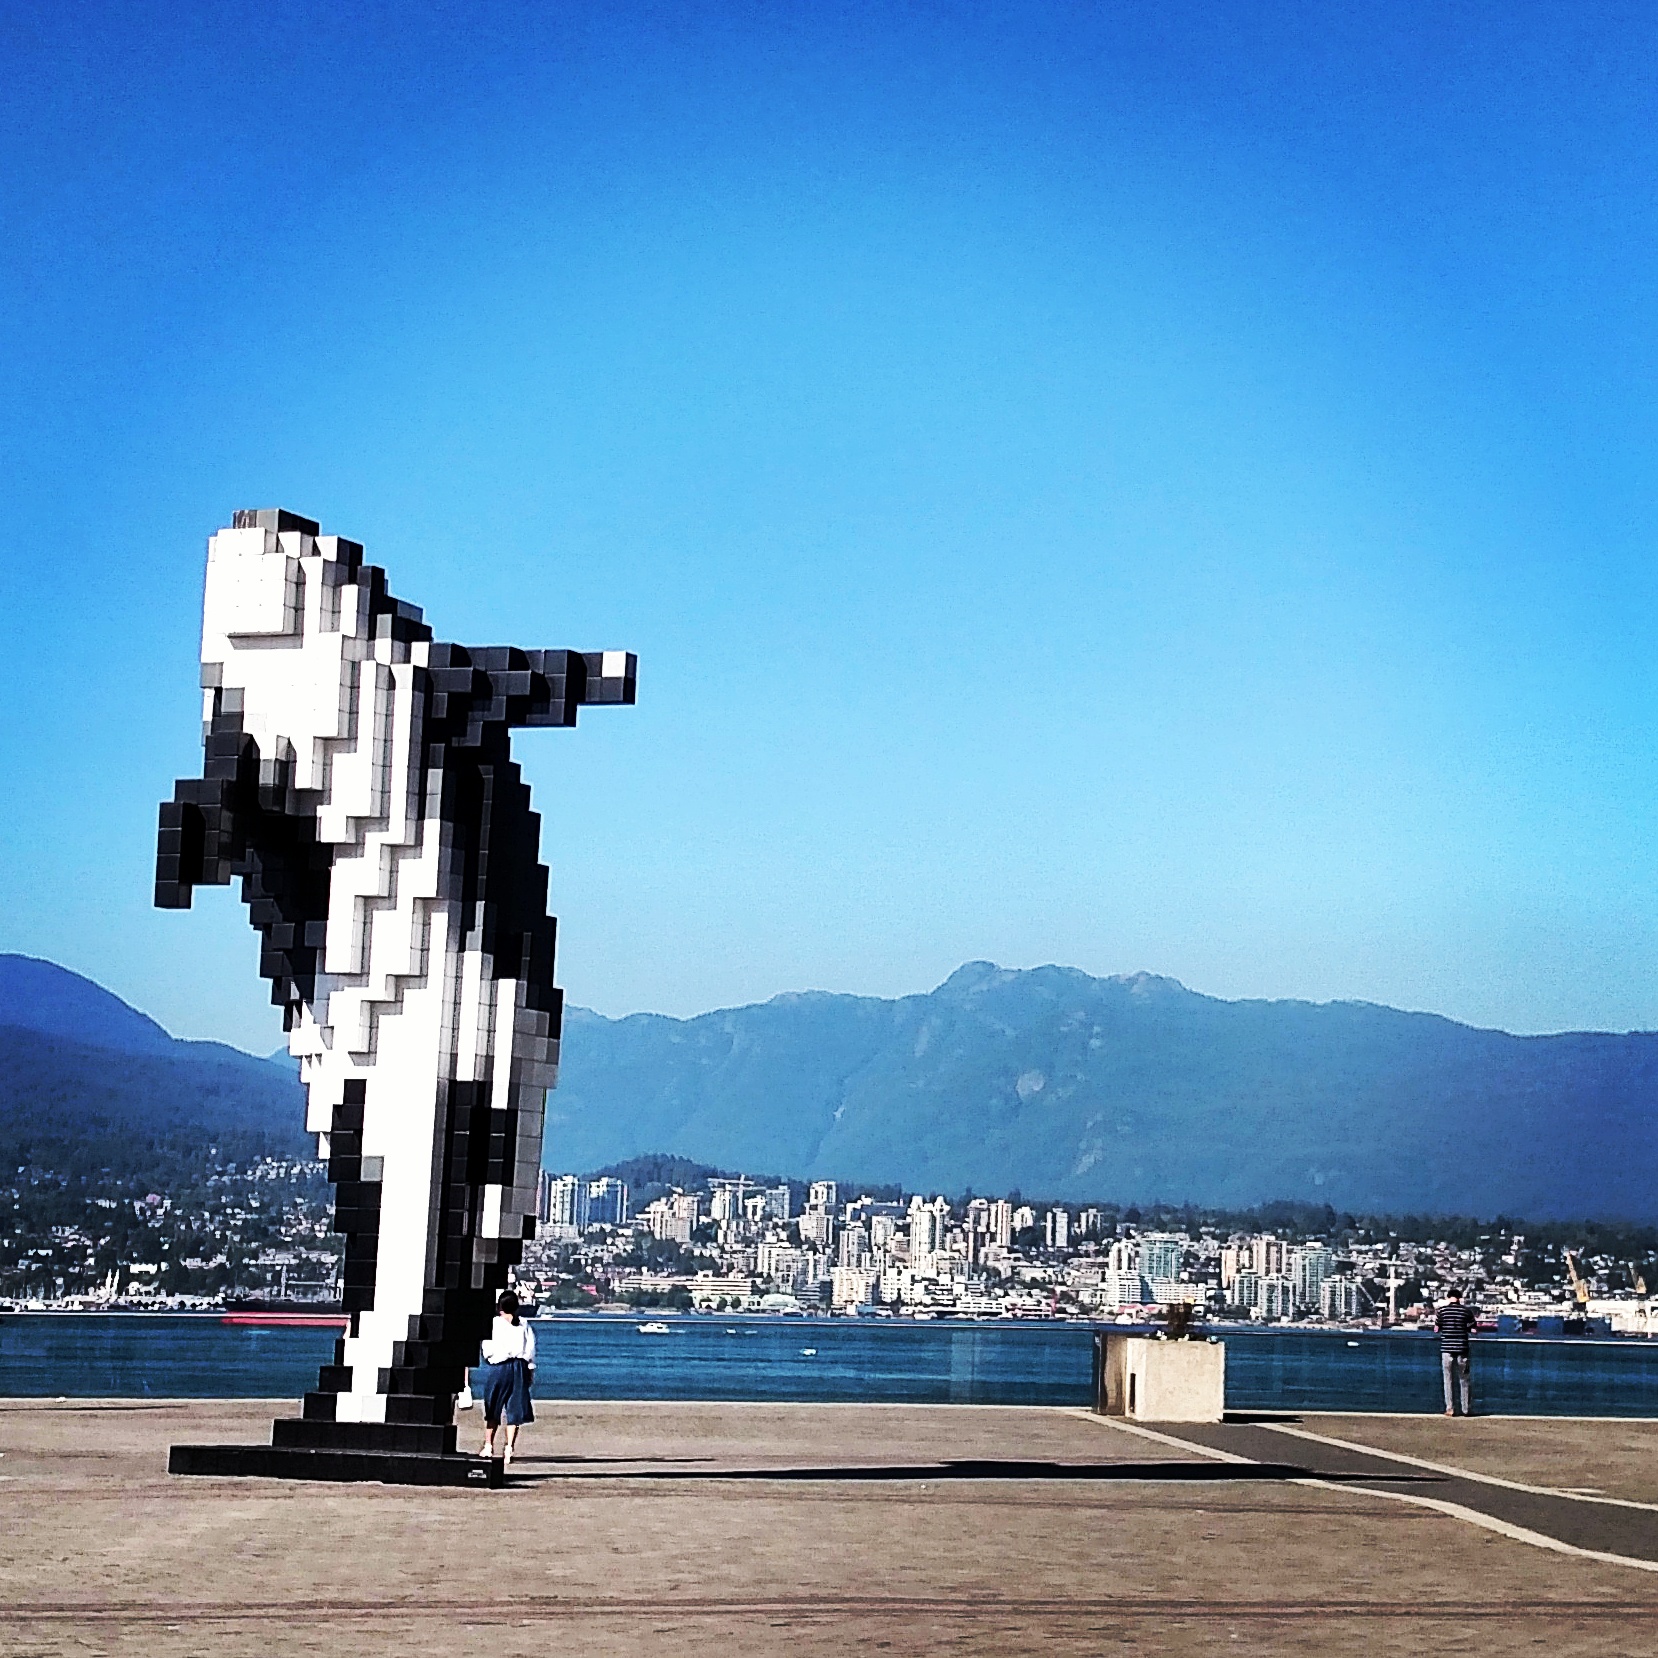 Vancouver BC .... Such a Creative City!